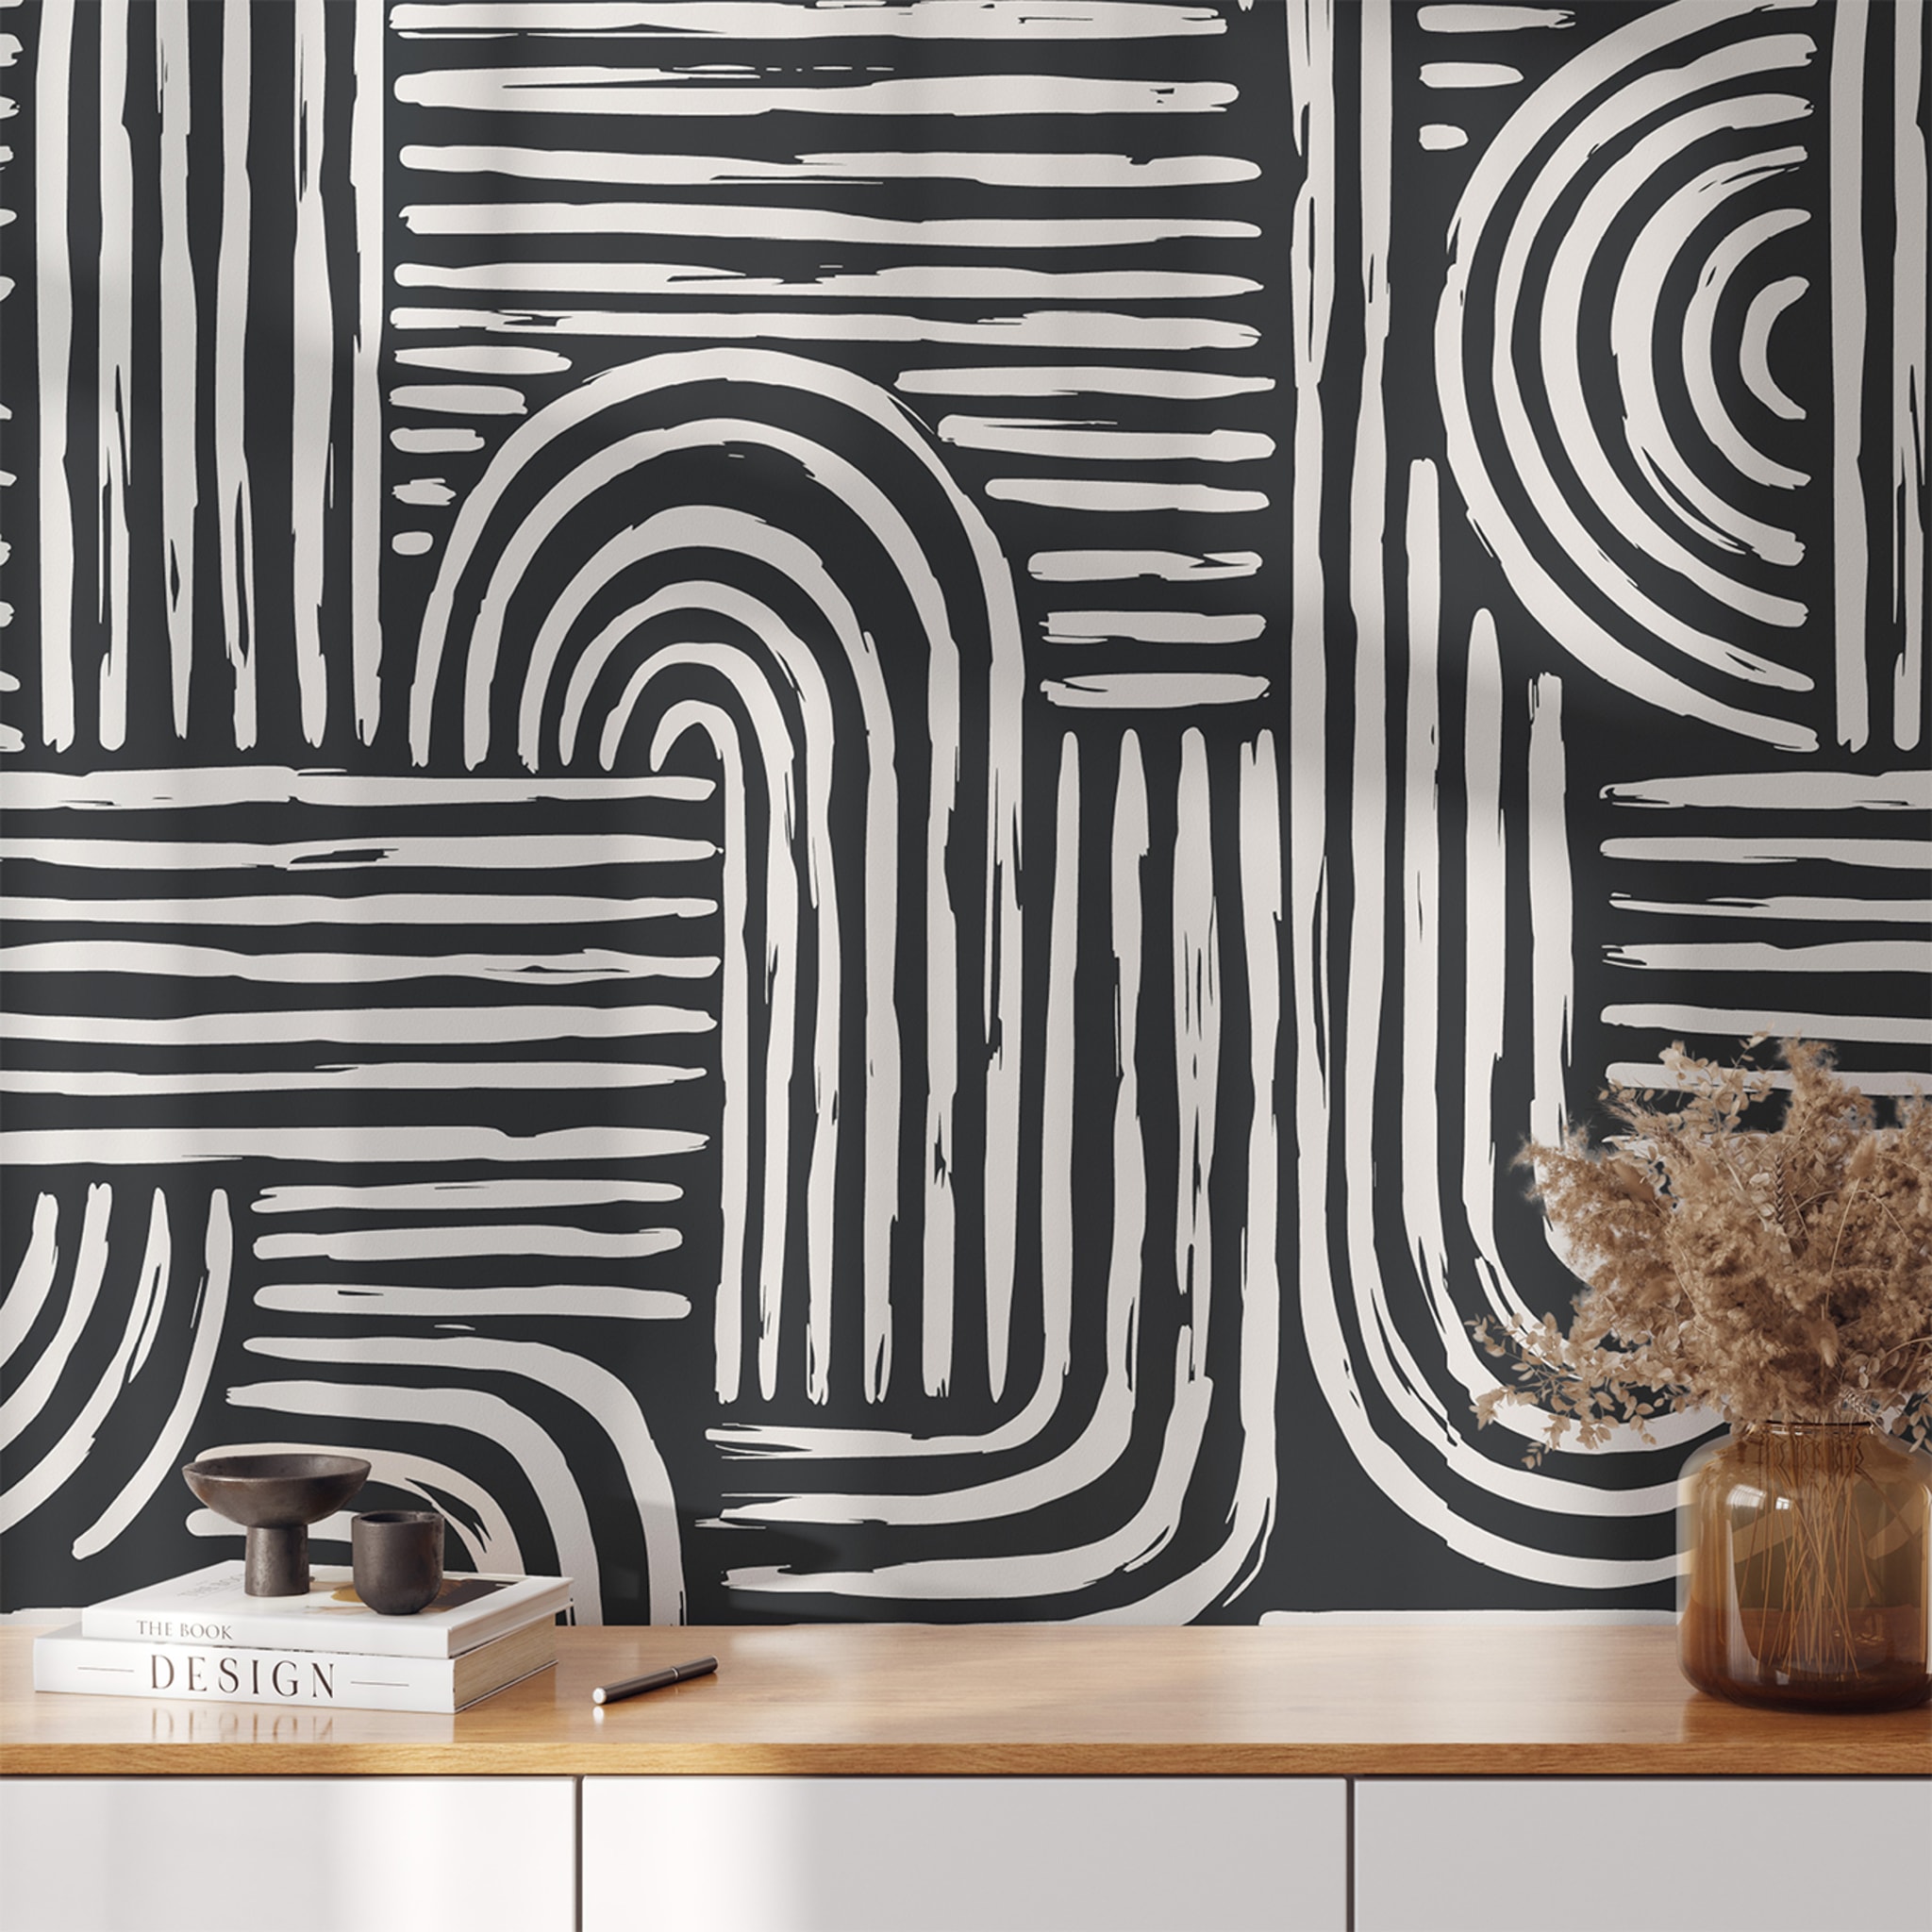 Black and White Abstract Wallpaper - Alternative view 1